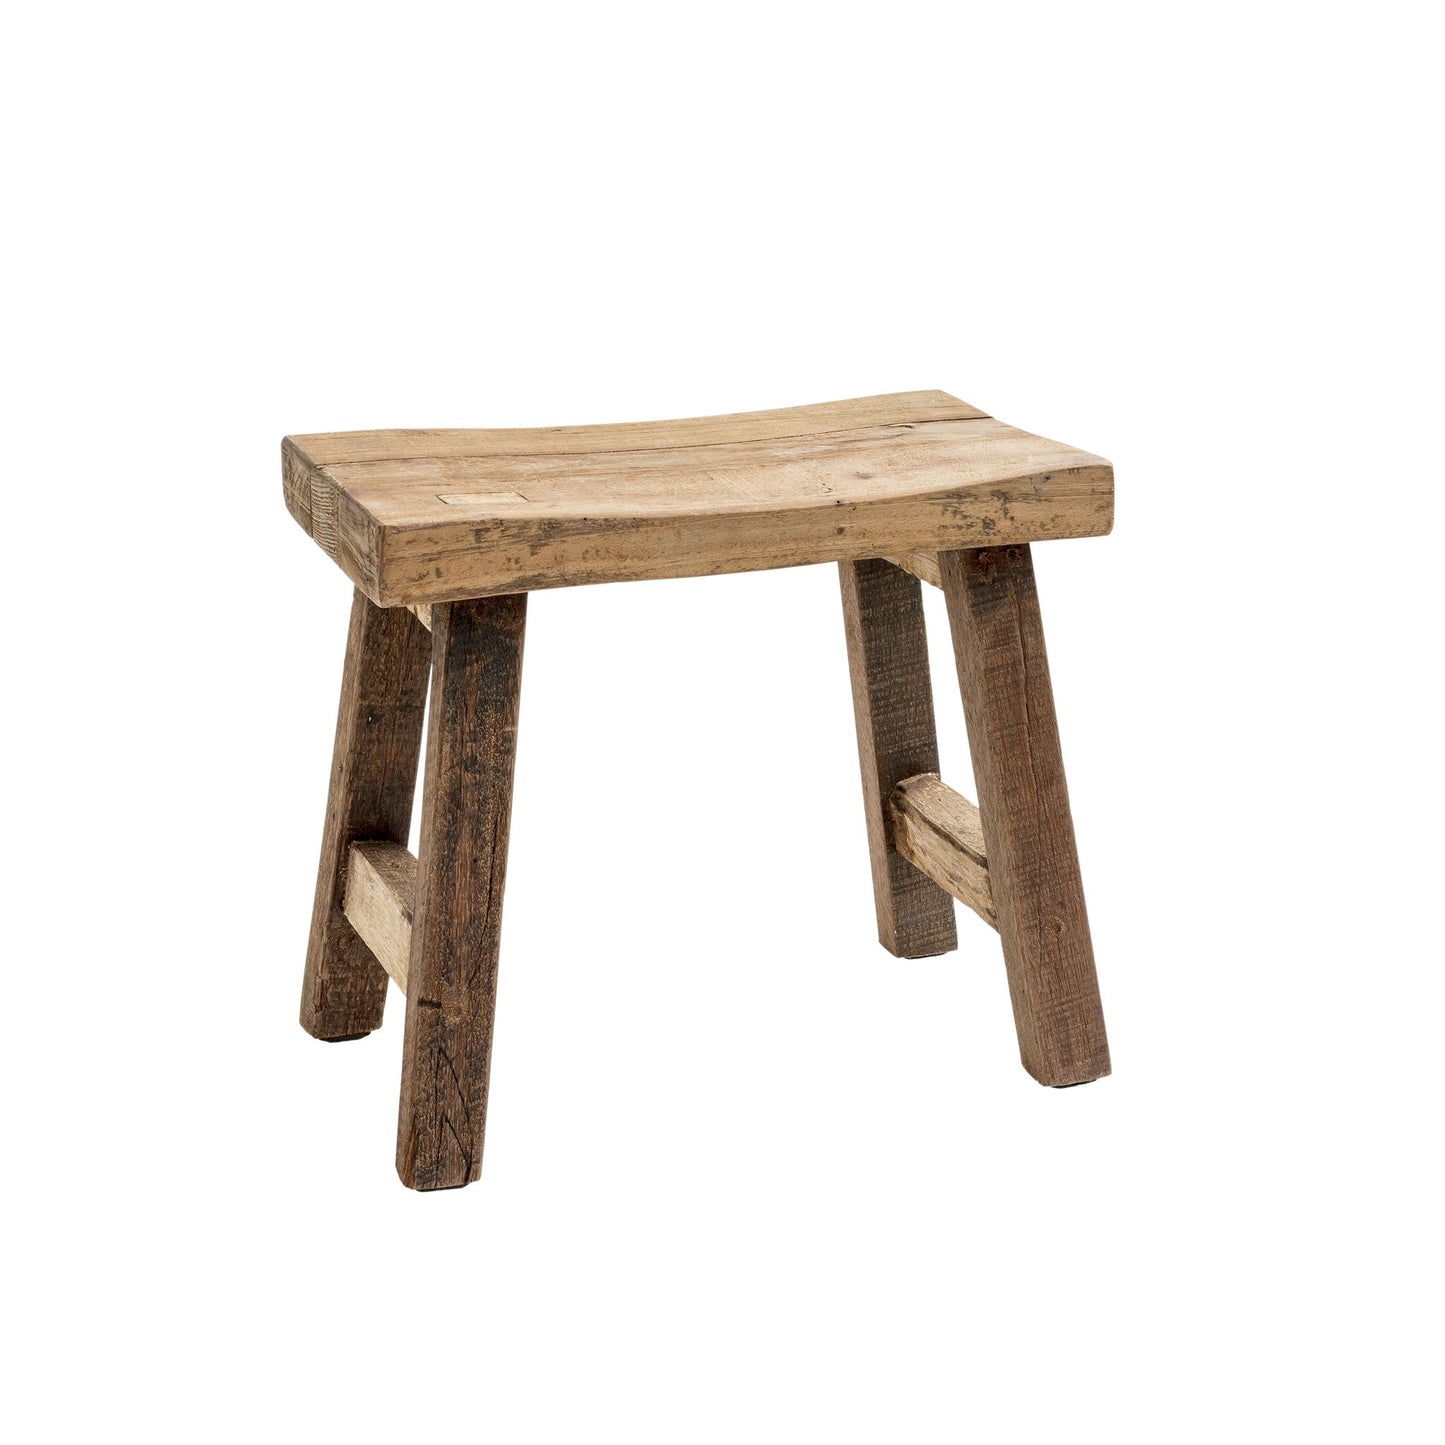 Natural wooden bench (pick up in store)